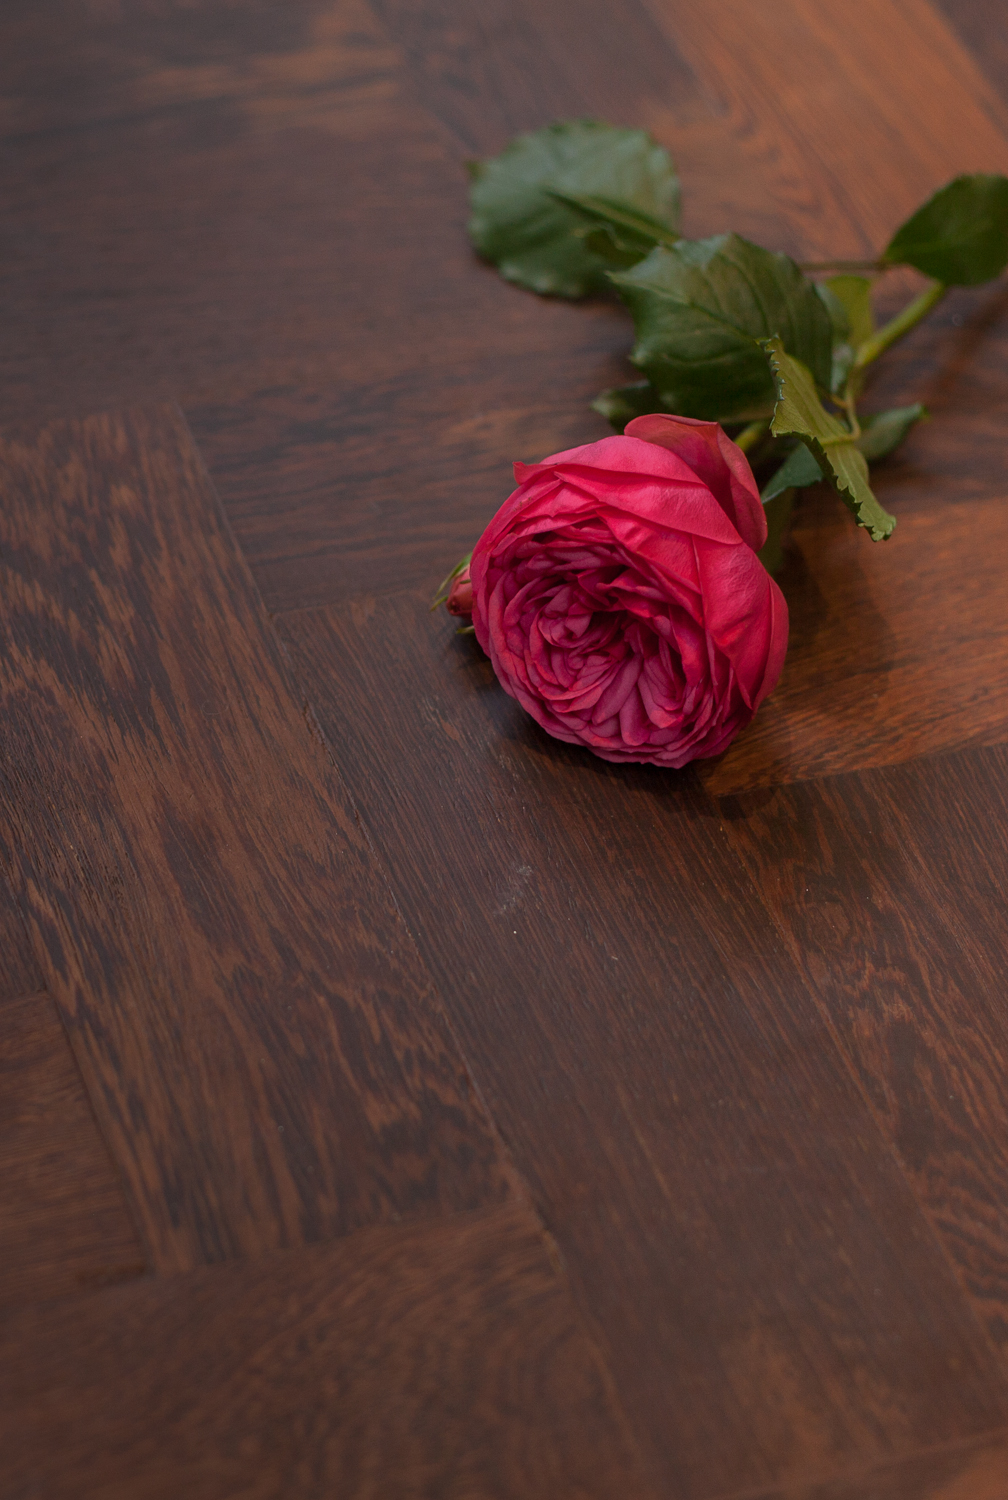 Panga panga wood flooring laid in parquet pattern with rose laid on the floor